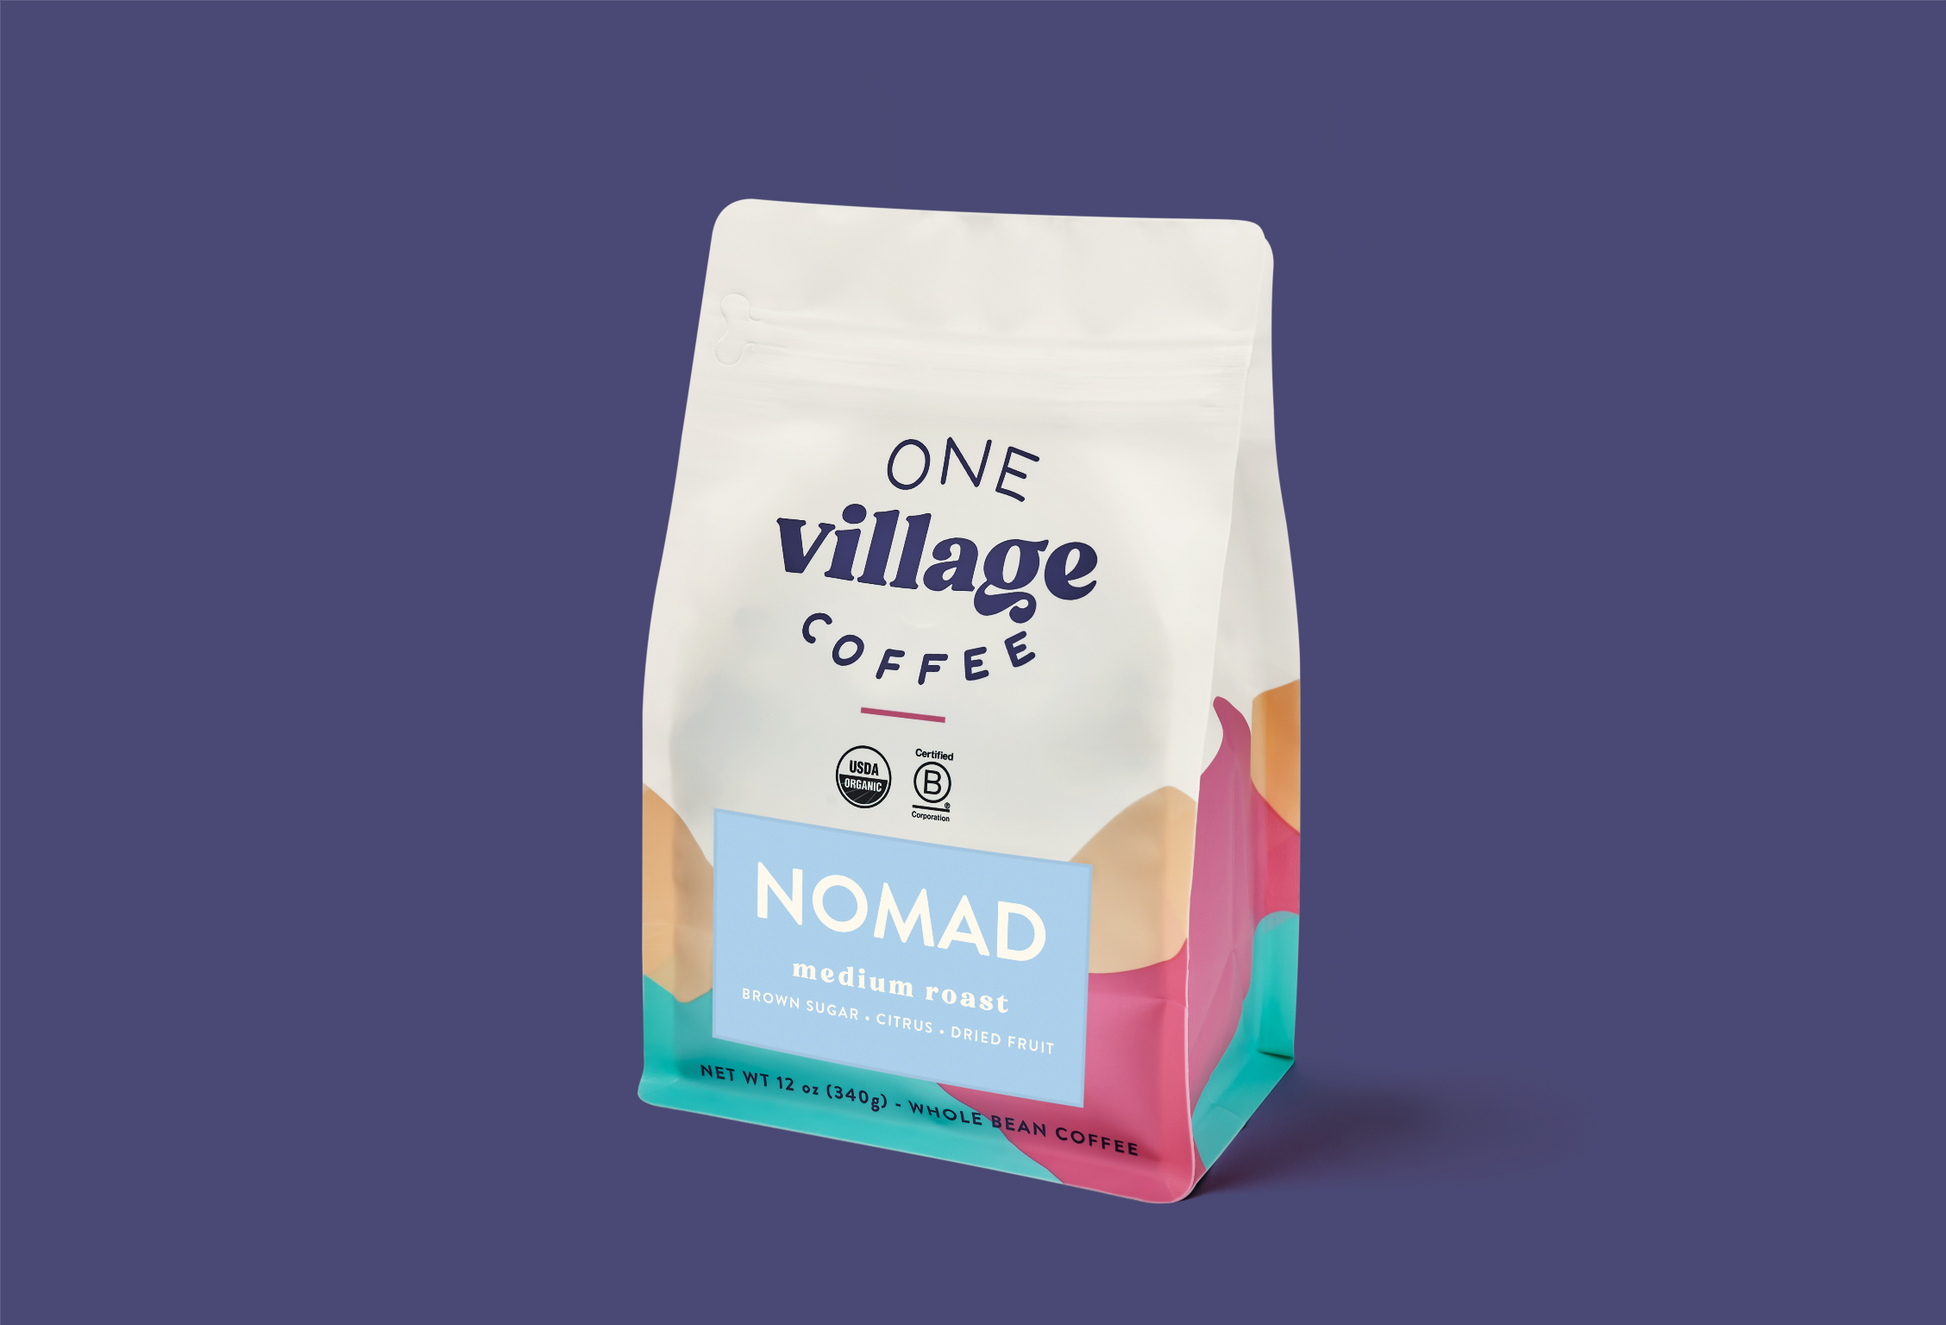 Image of Nomad coffee bag.